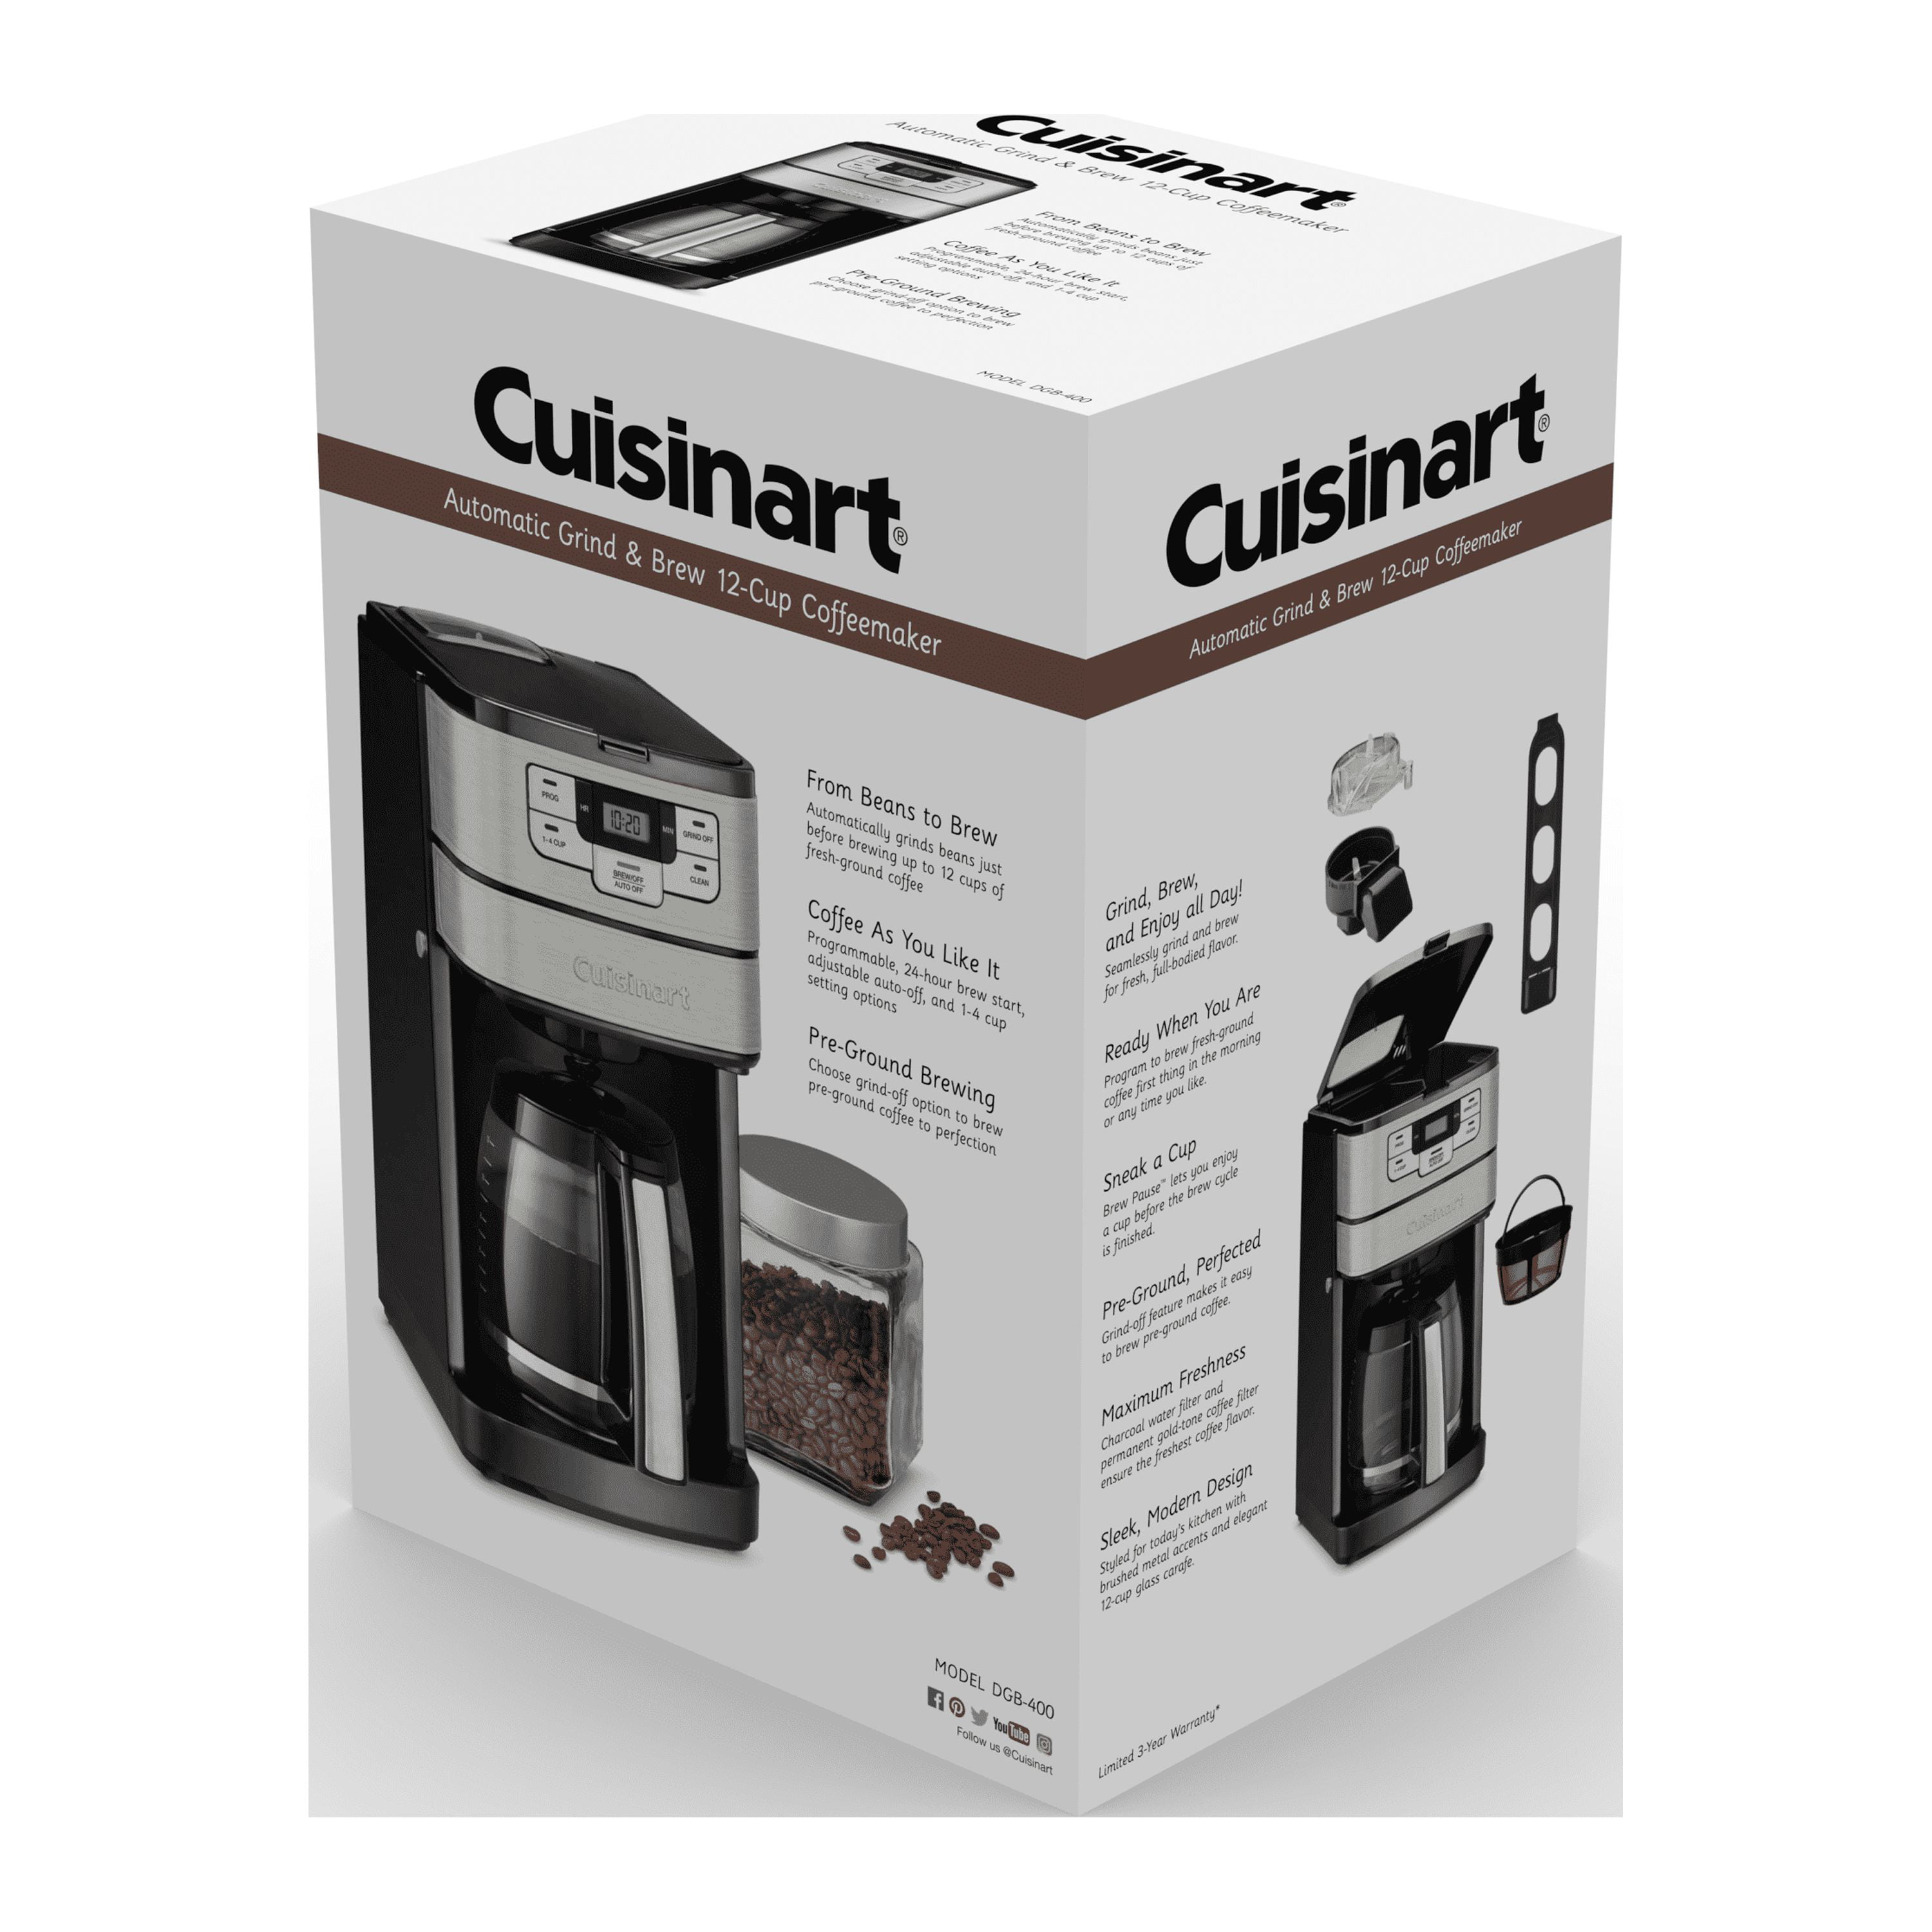 Cuisinart 12 Cup Automatic Grind & Brew Coffeemaker, Black, DGB